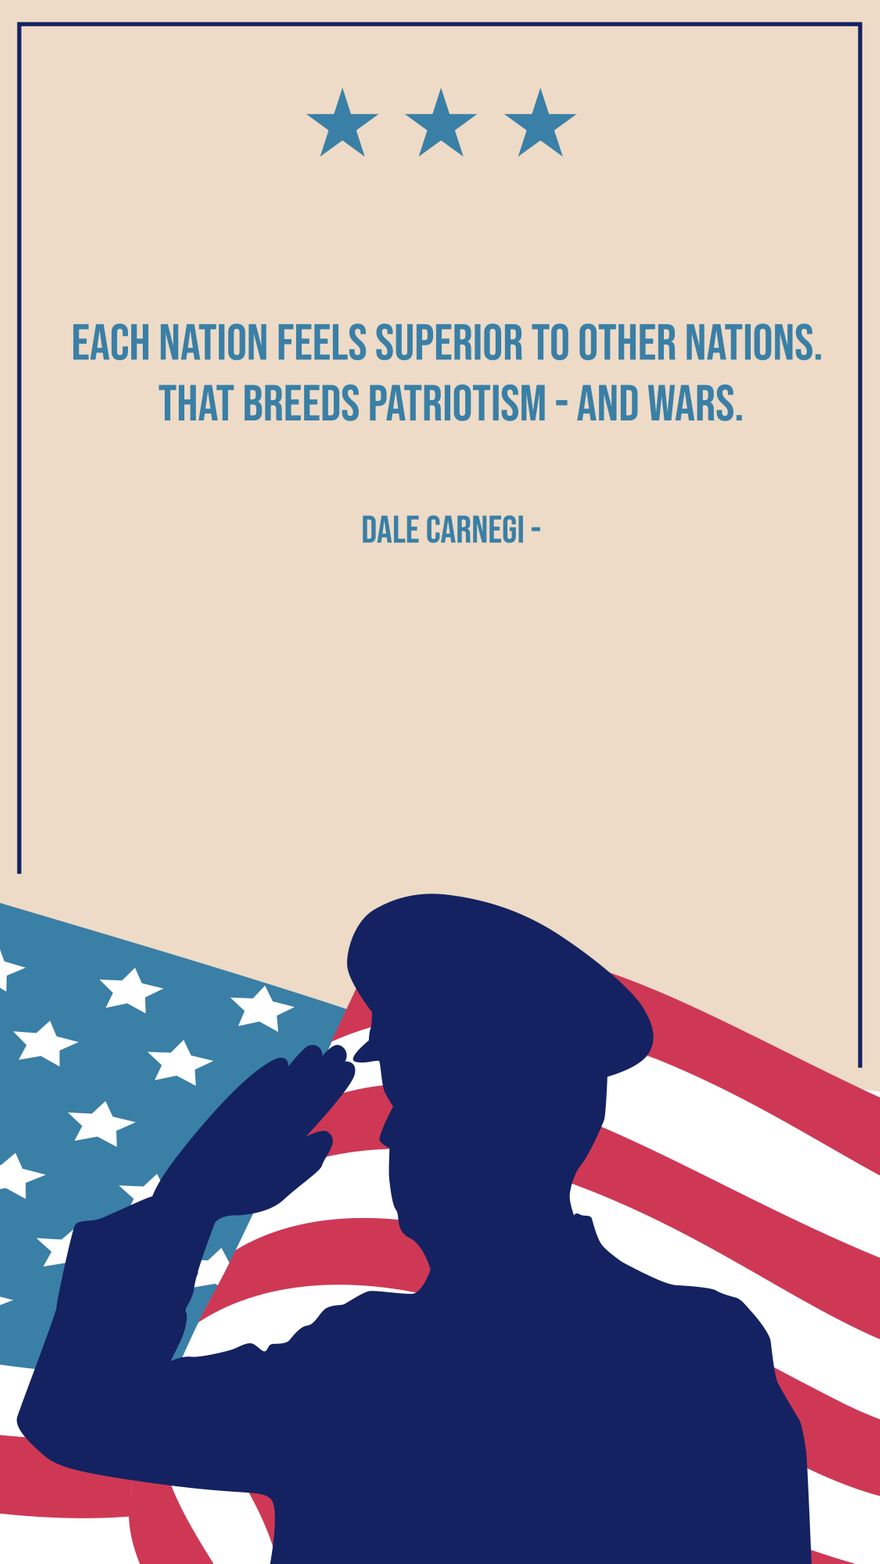 Dale Carnegi - Each nation feels superior to other nations. That breeds patriotism - and wars. in JPG